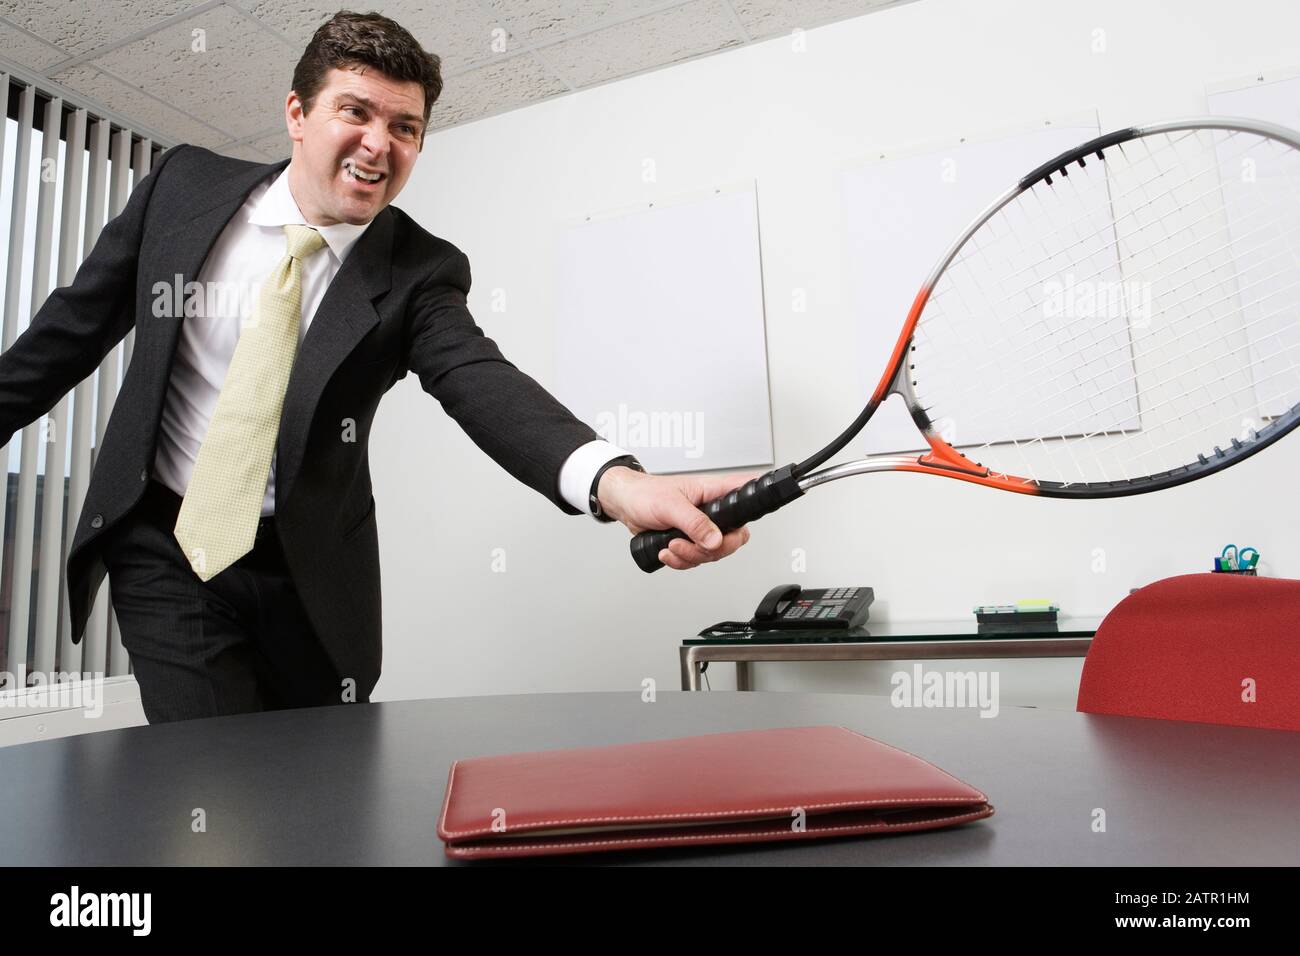 View of a business man holding a tennis racquet in an office Stock Photo -  Alamy